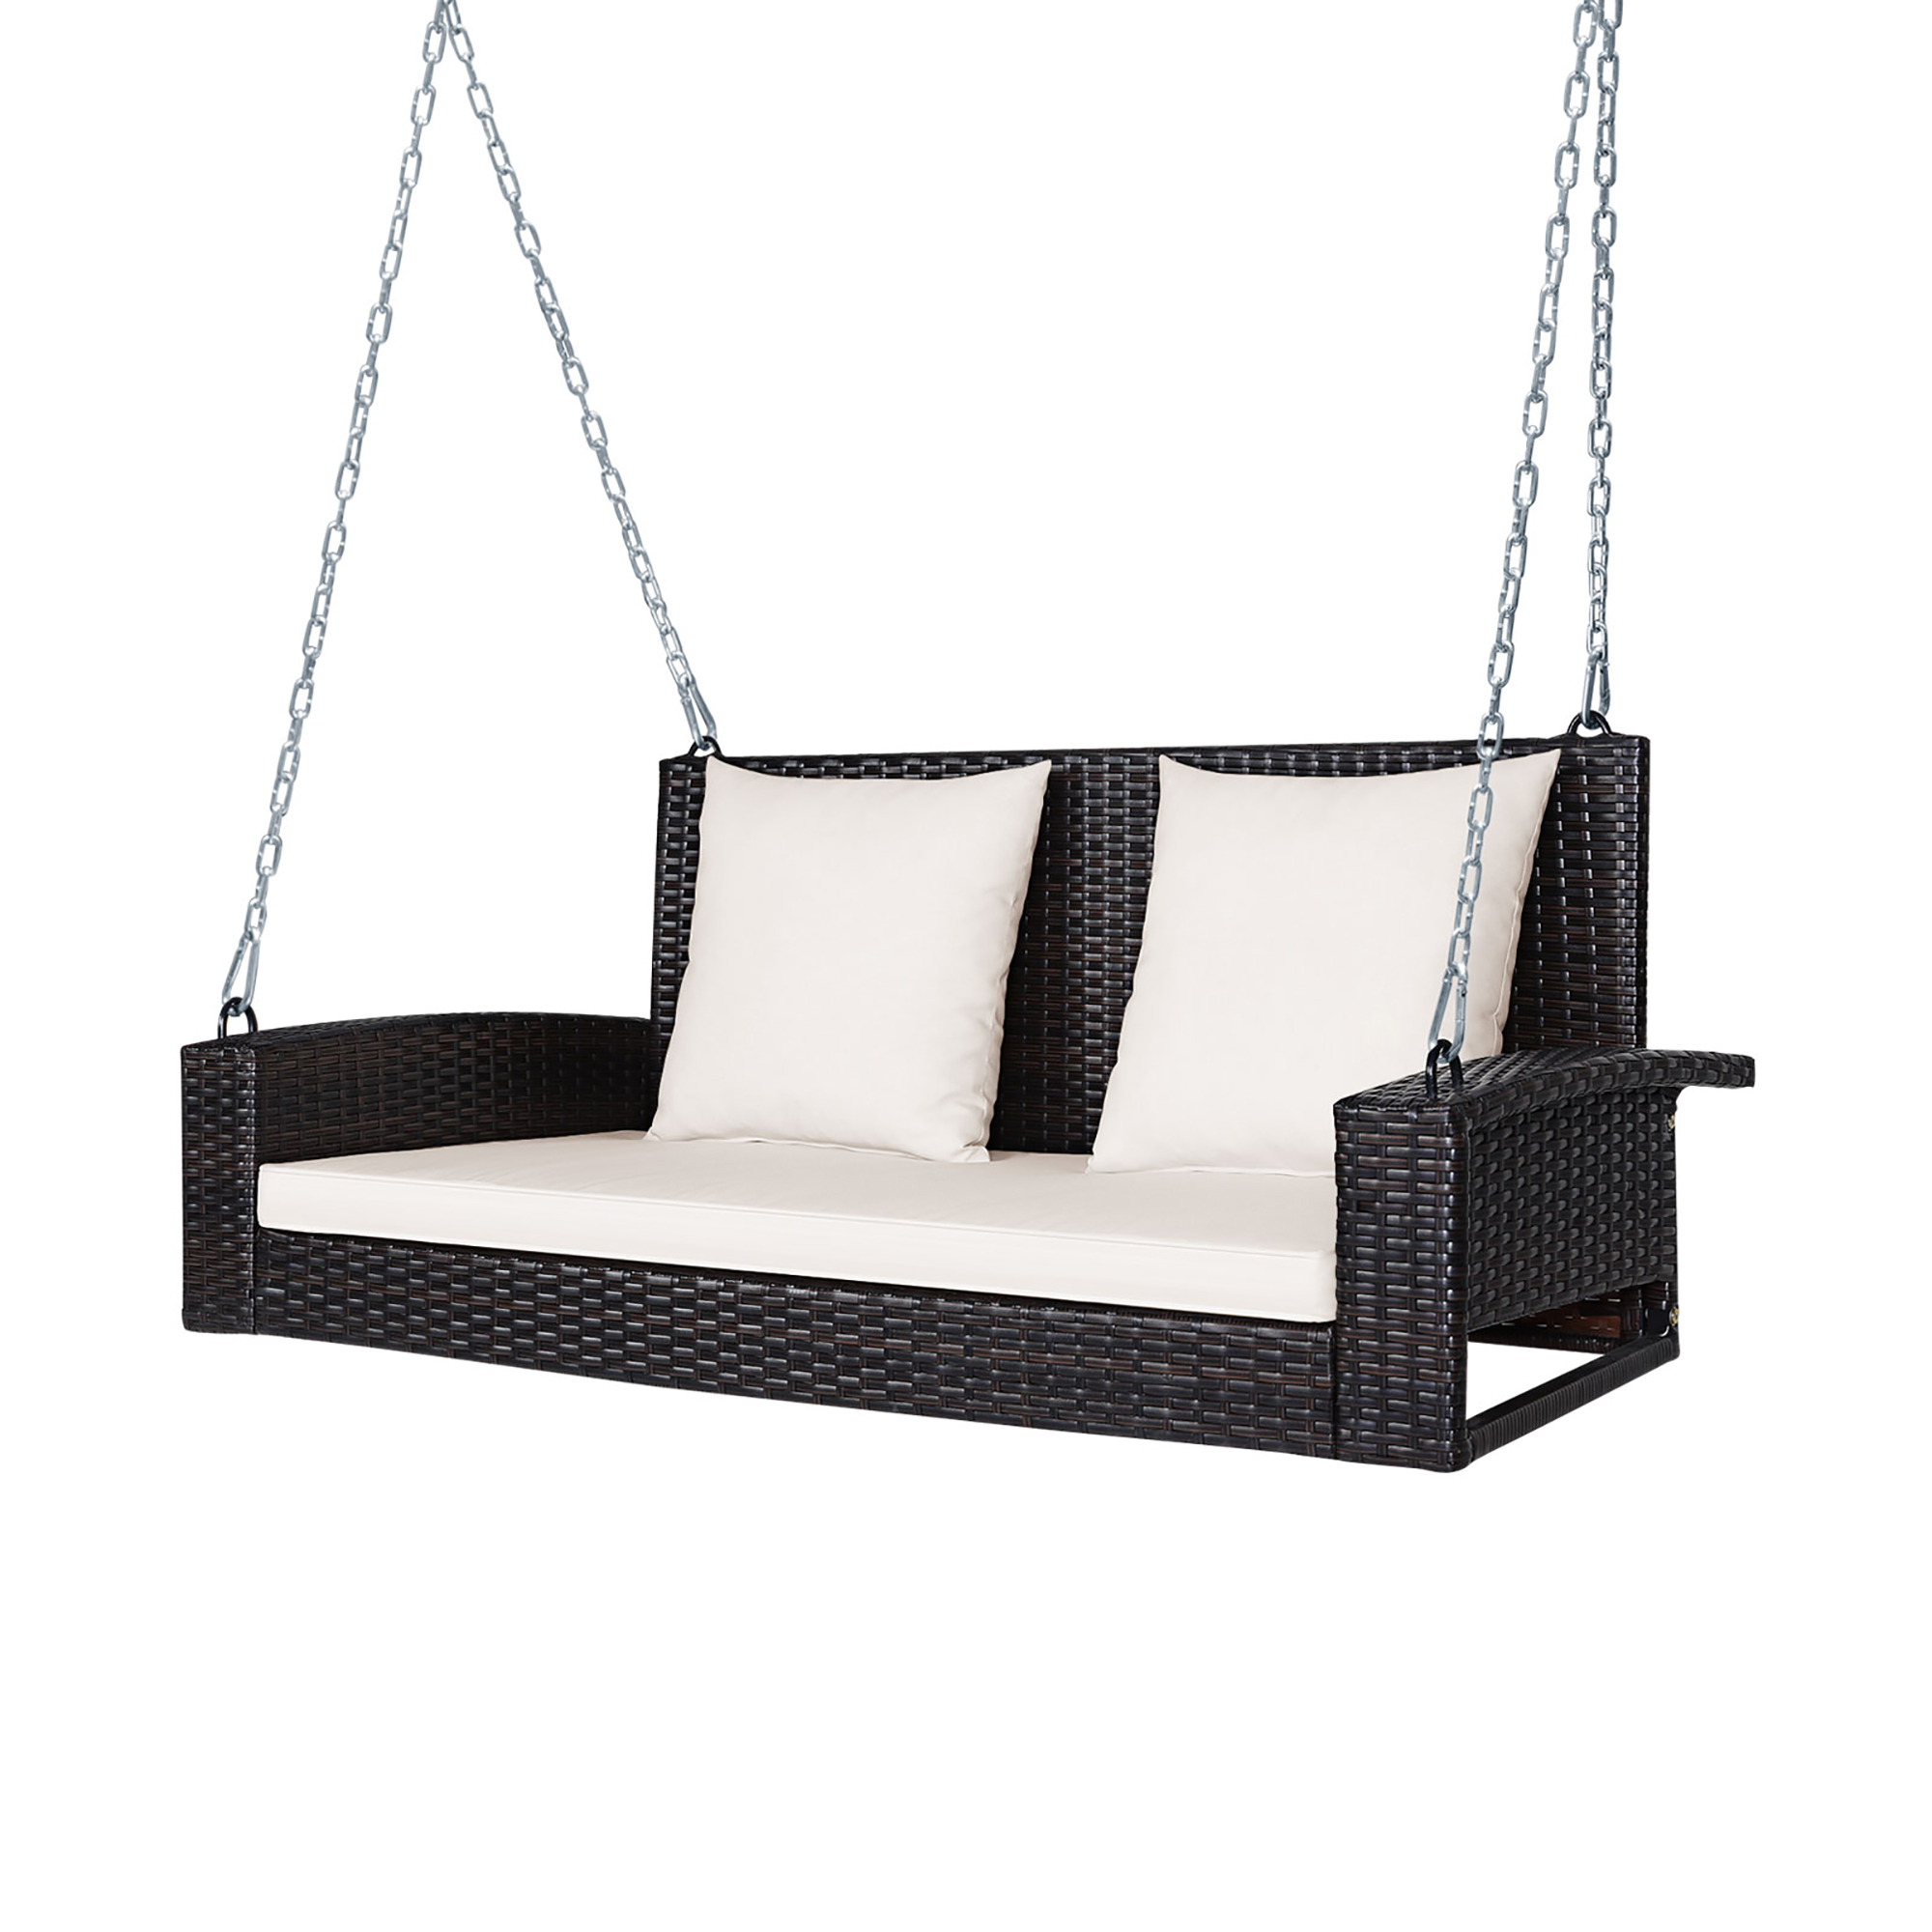 Costway 2-Person Patio Rattan Hanging Porch Swing Bench Chair Cushion Beige - image 5 of 10